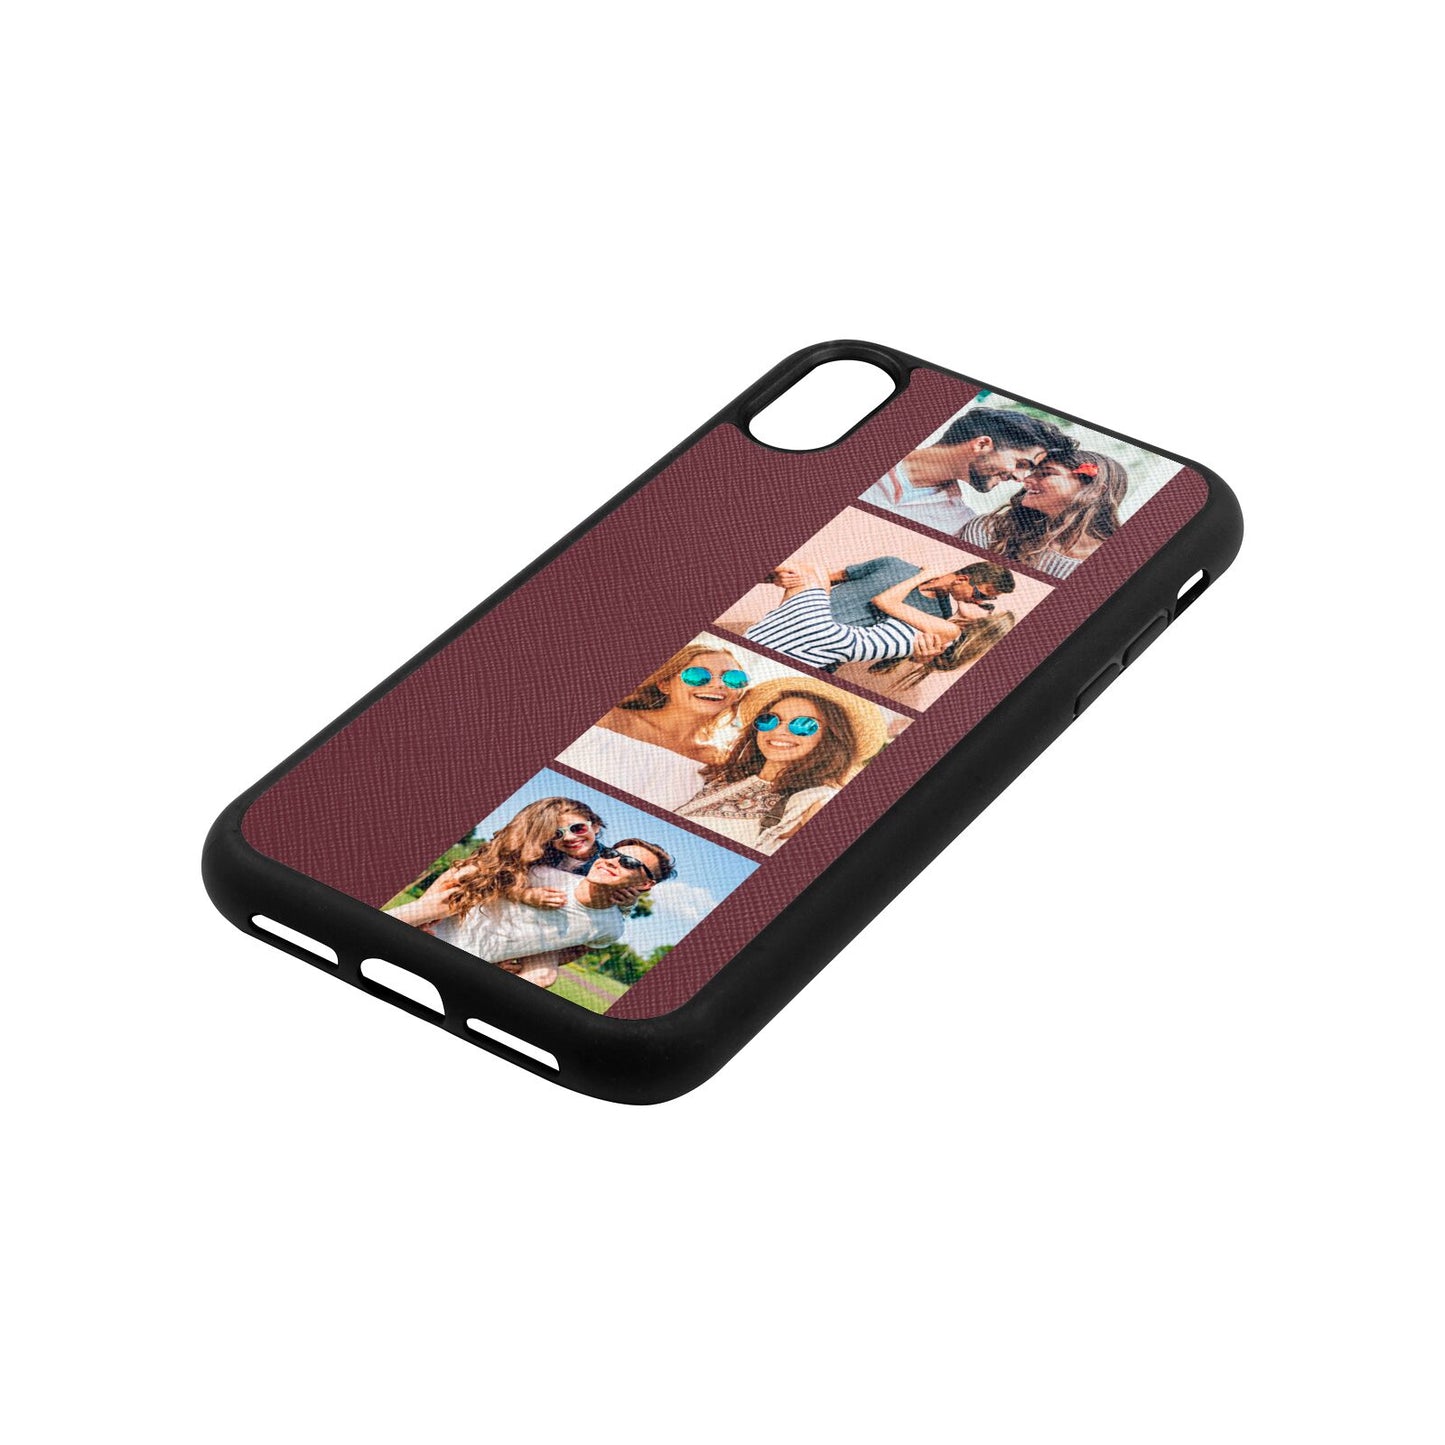 Photo Strip Montage Upload Rose Brown Saffiano Leather iPhone Xr Case Side Angle